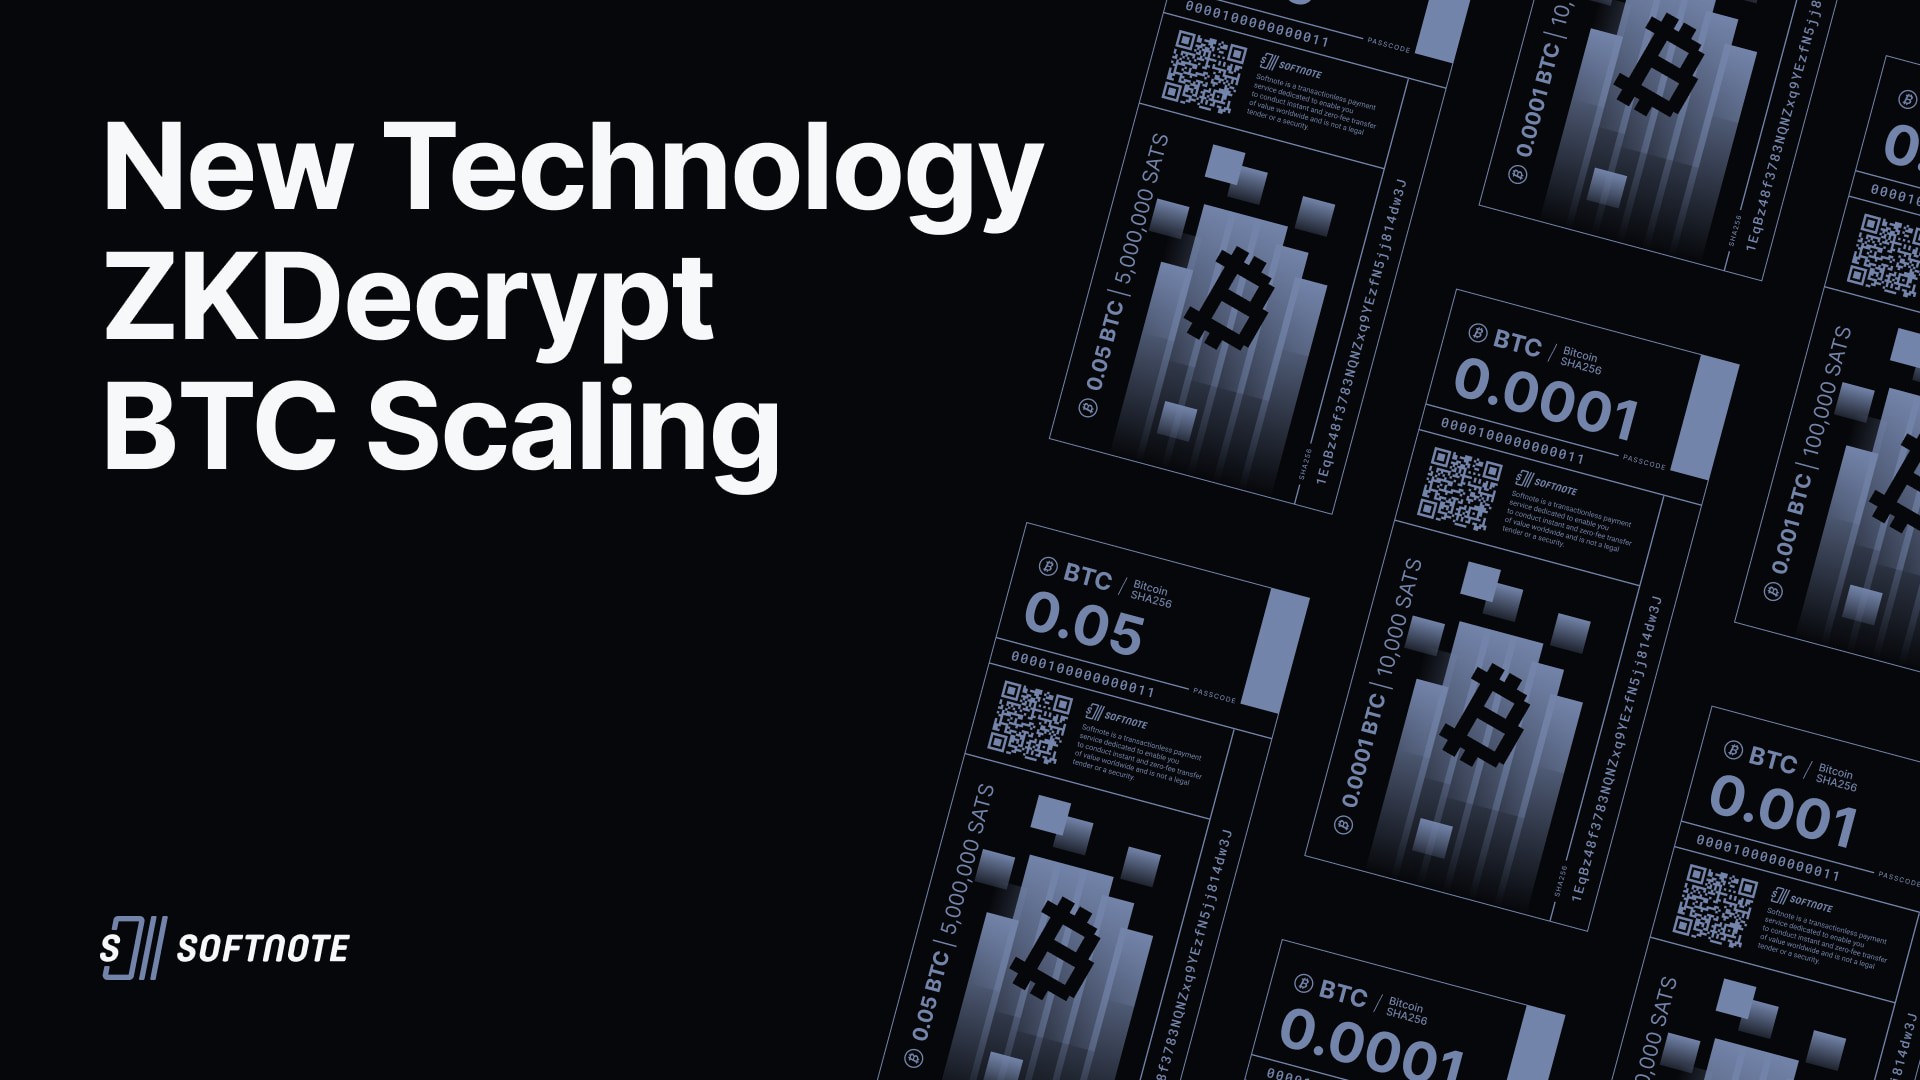 Tectum Launches ZKDecrypt – The Innovative Bitcoin Scaling Solution